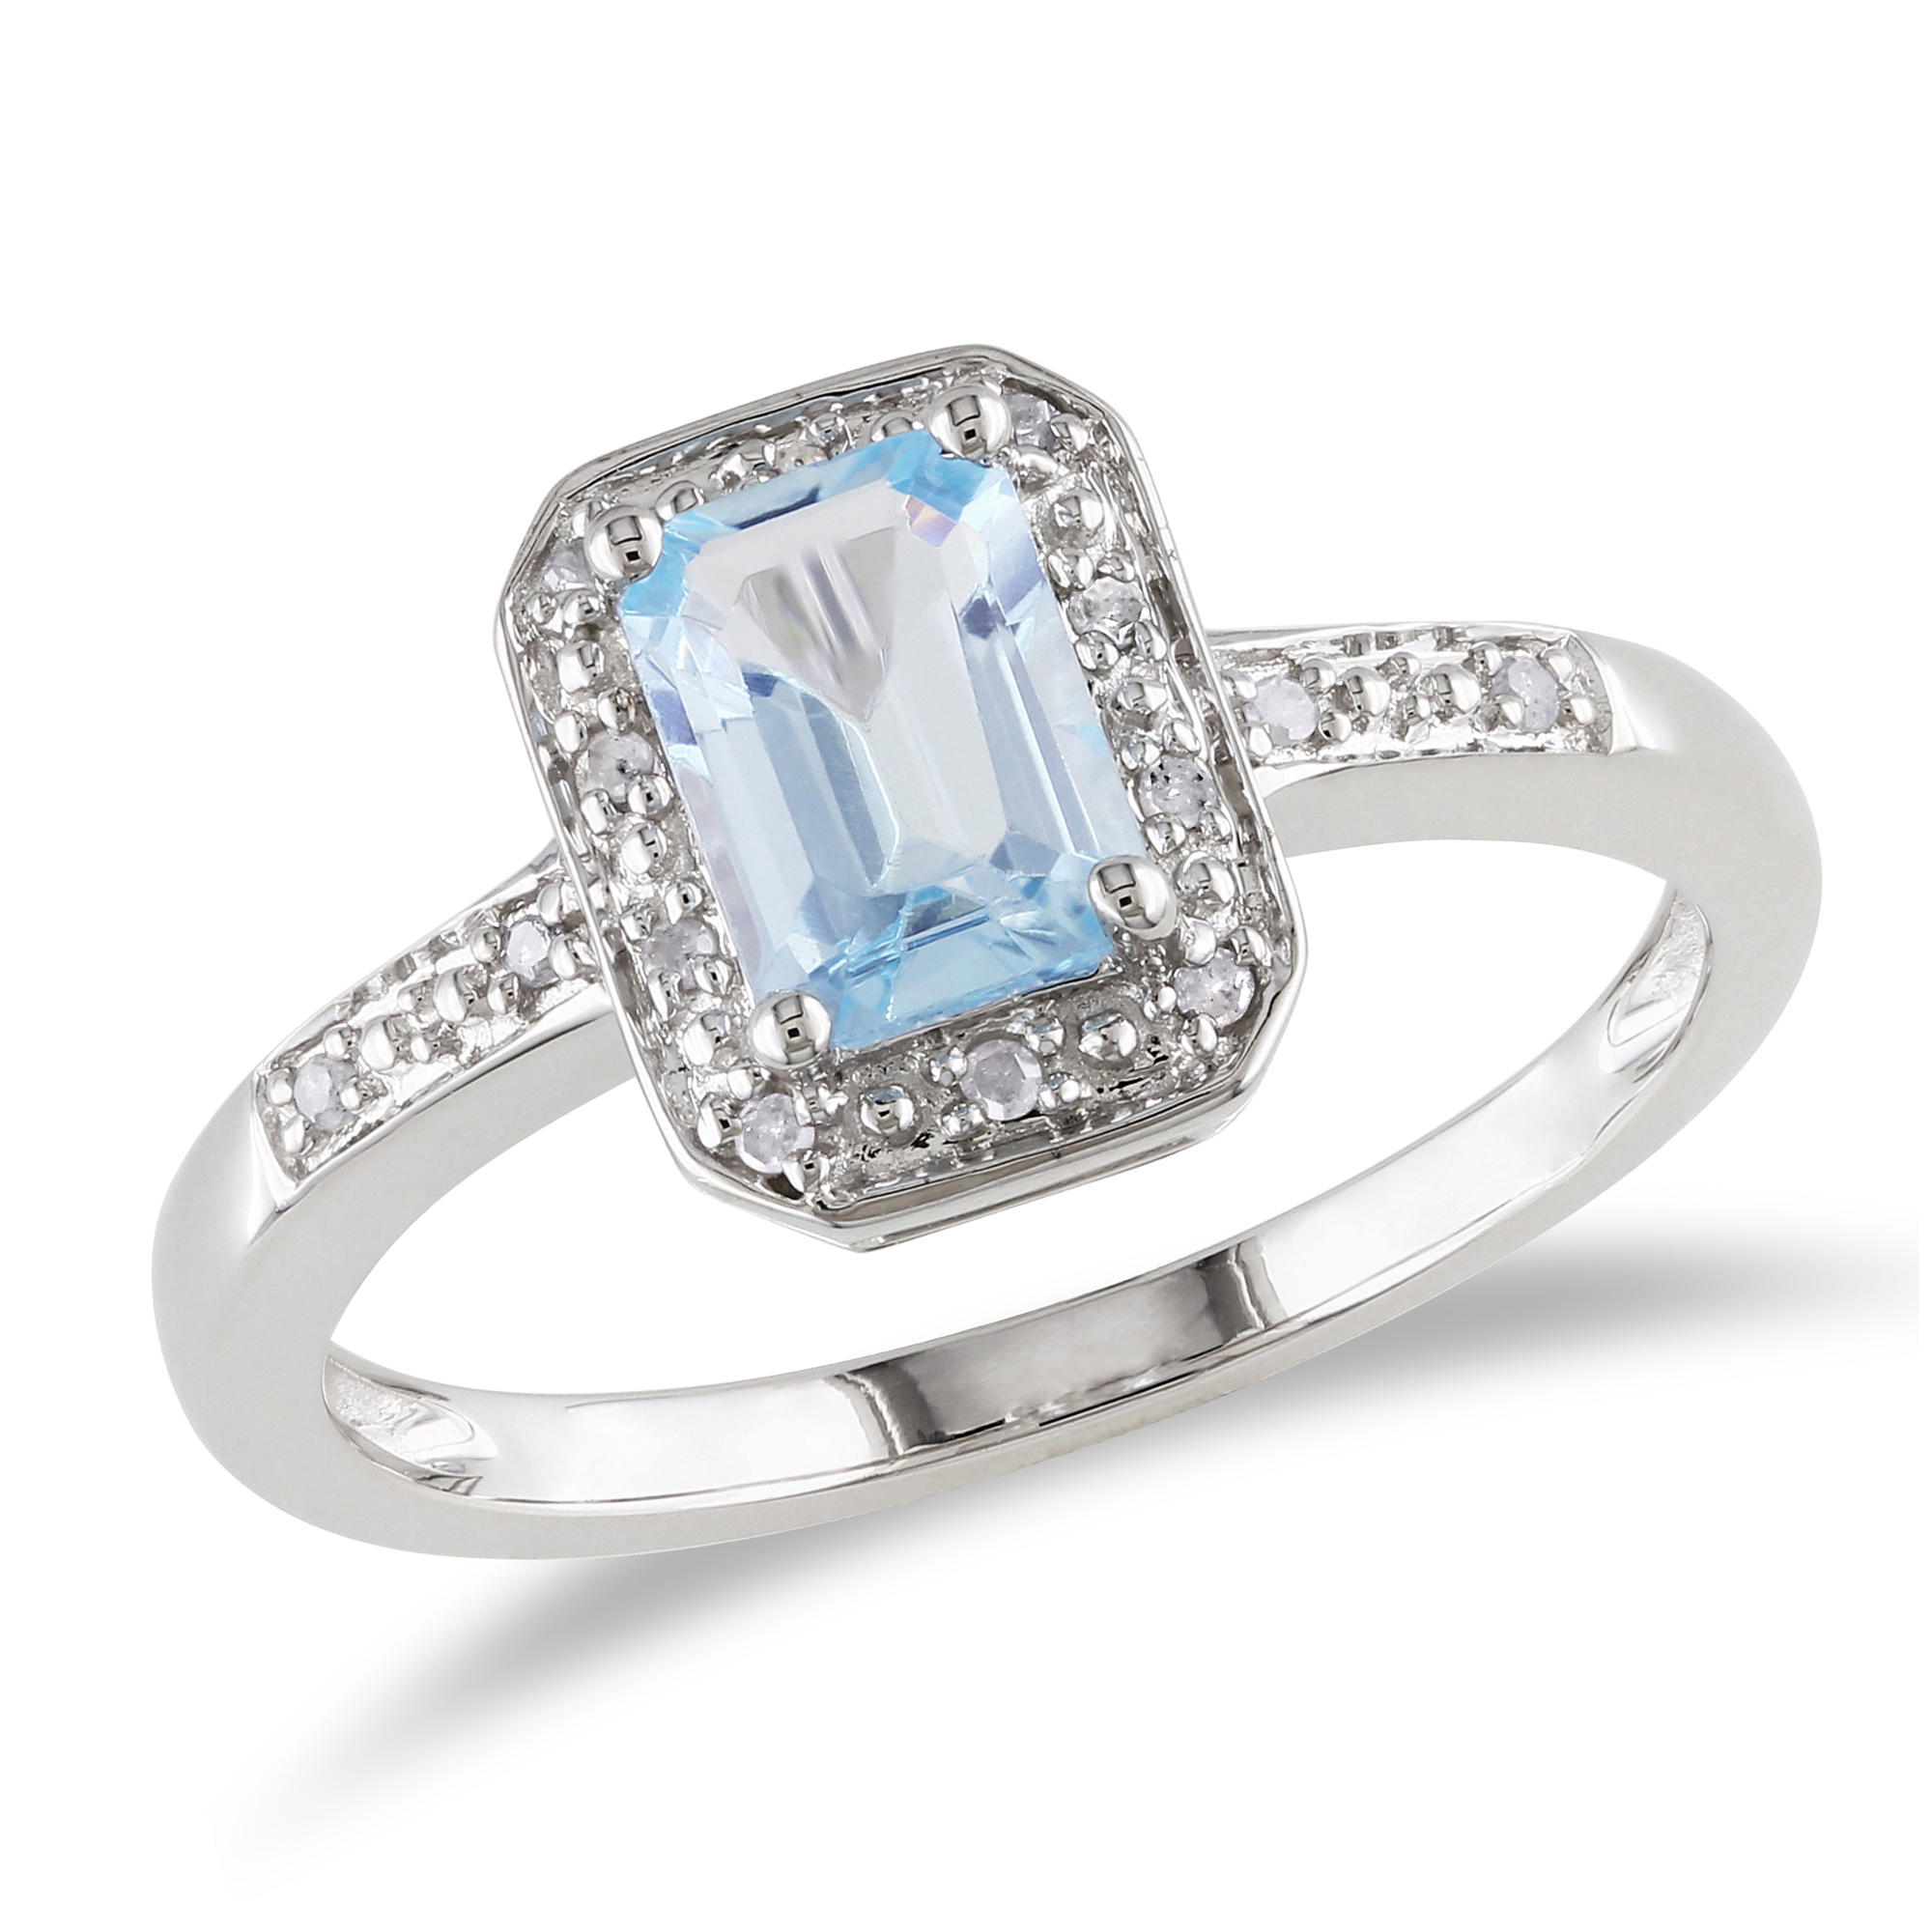 Amour 0.06 Carat T.W. Diamond and 1 1/5 Carat T.G.W. Blue Topaz Fashion Ring in Sterling Silver I3